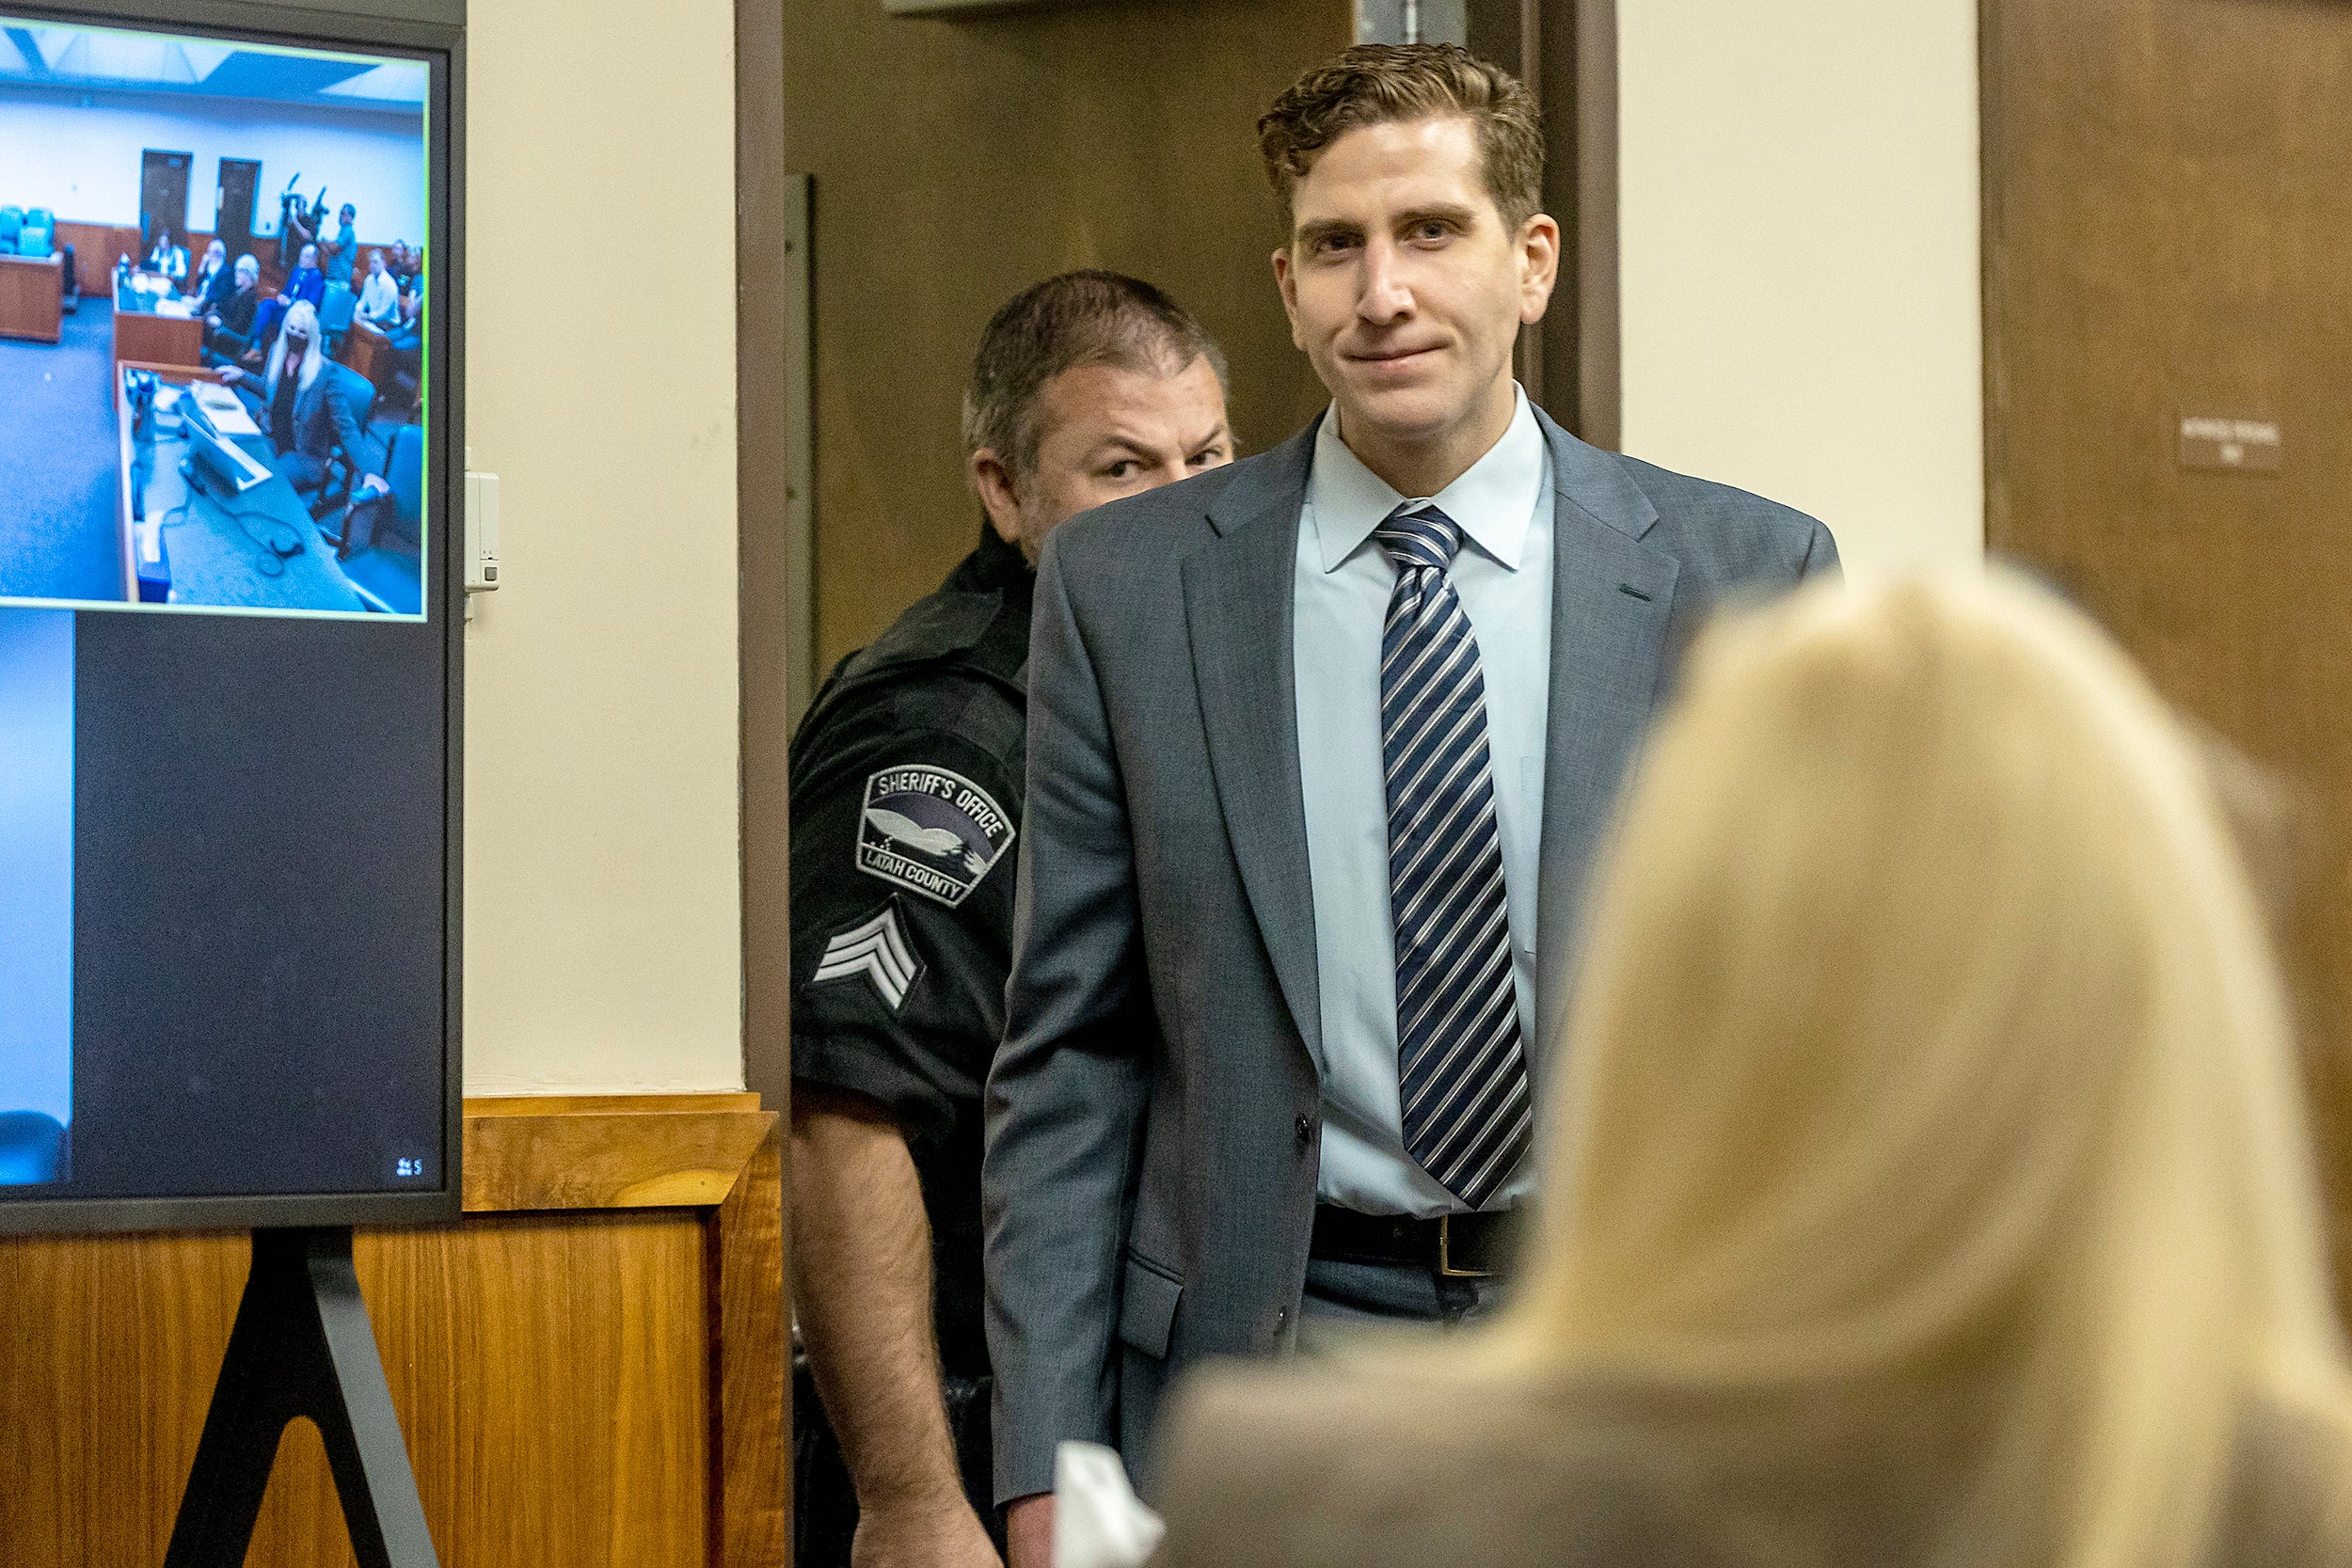 Bryan Kohberger enters the courtroom for a hearing, on 18 August, at the Latah County Courthouse in Moscow, Idaho